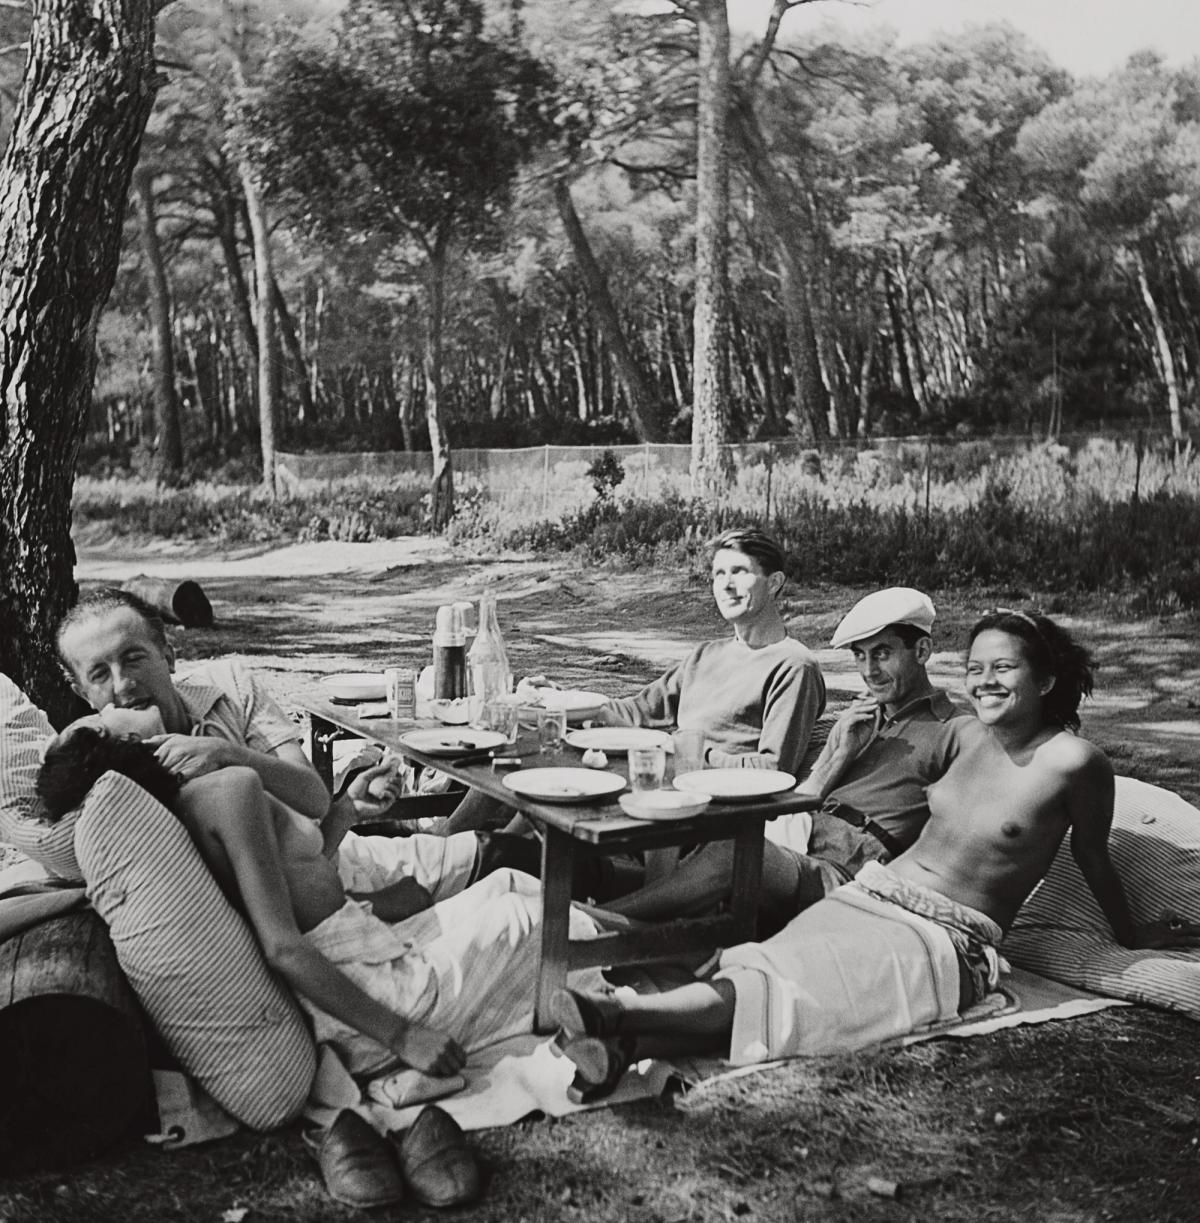 Picnic, Île Sainte-Marguerite, Cannes, France (1937) by Lee Miller © 2023 Lee Miller Archives, England. All rights reserved